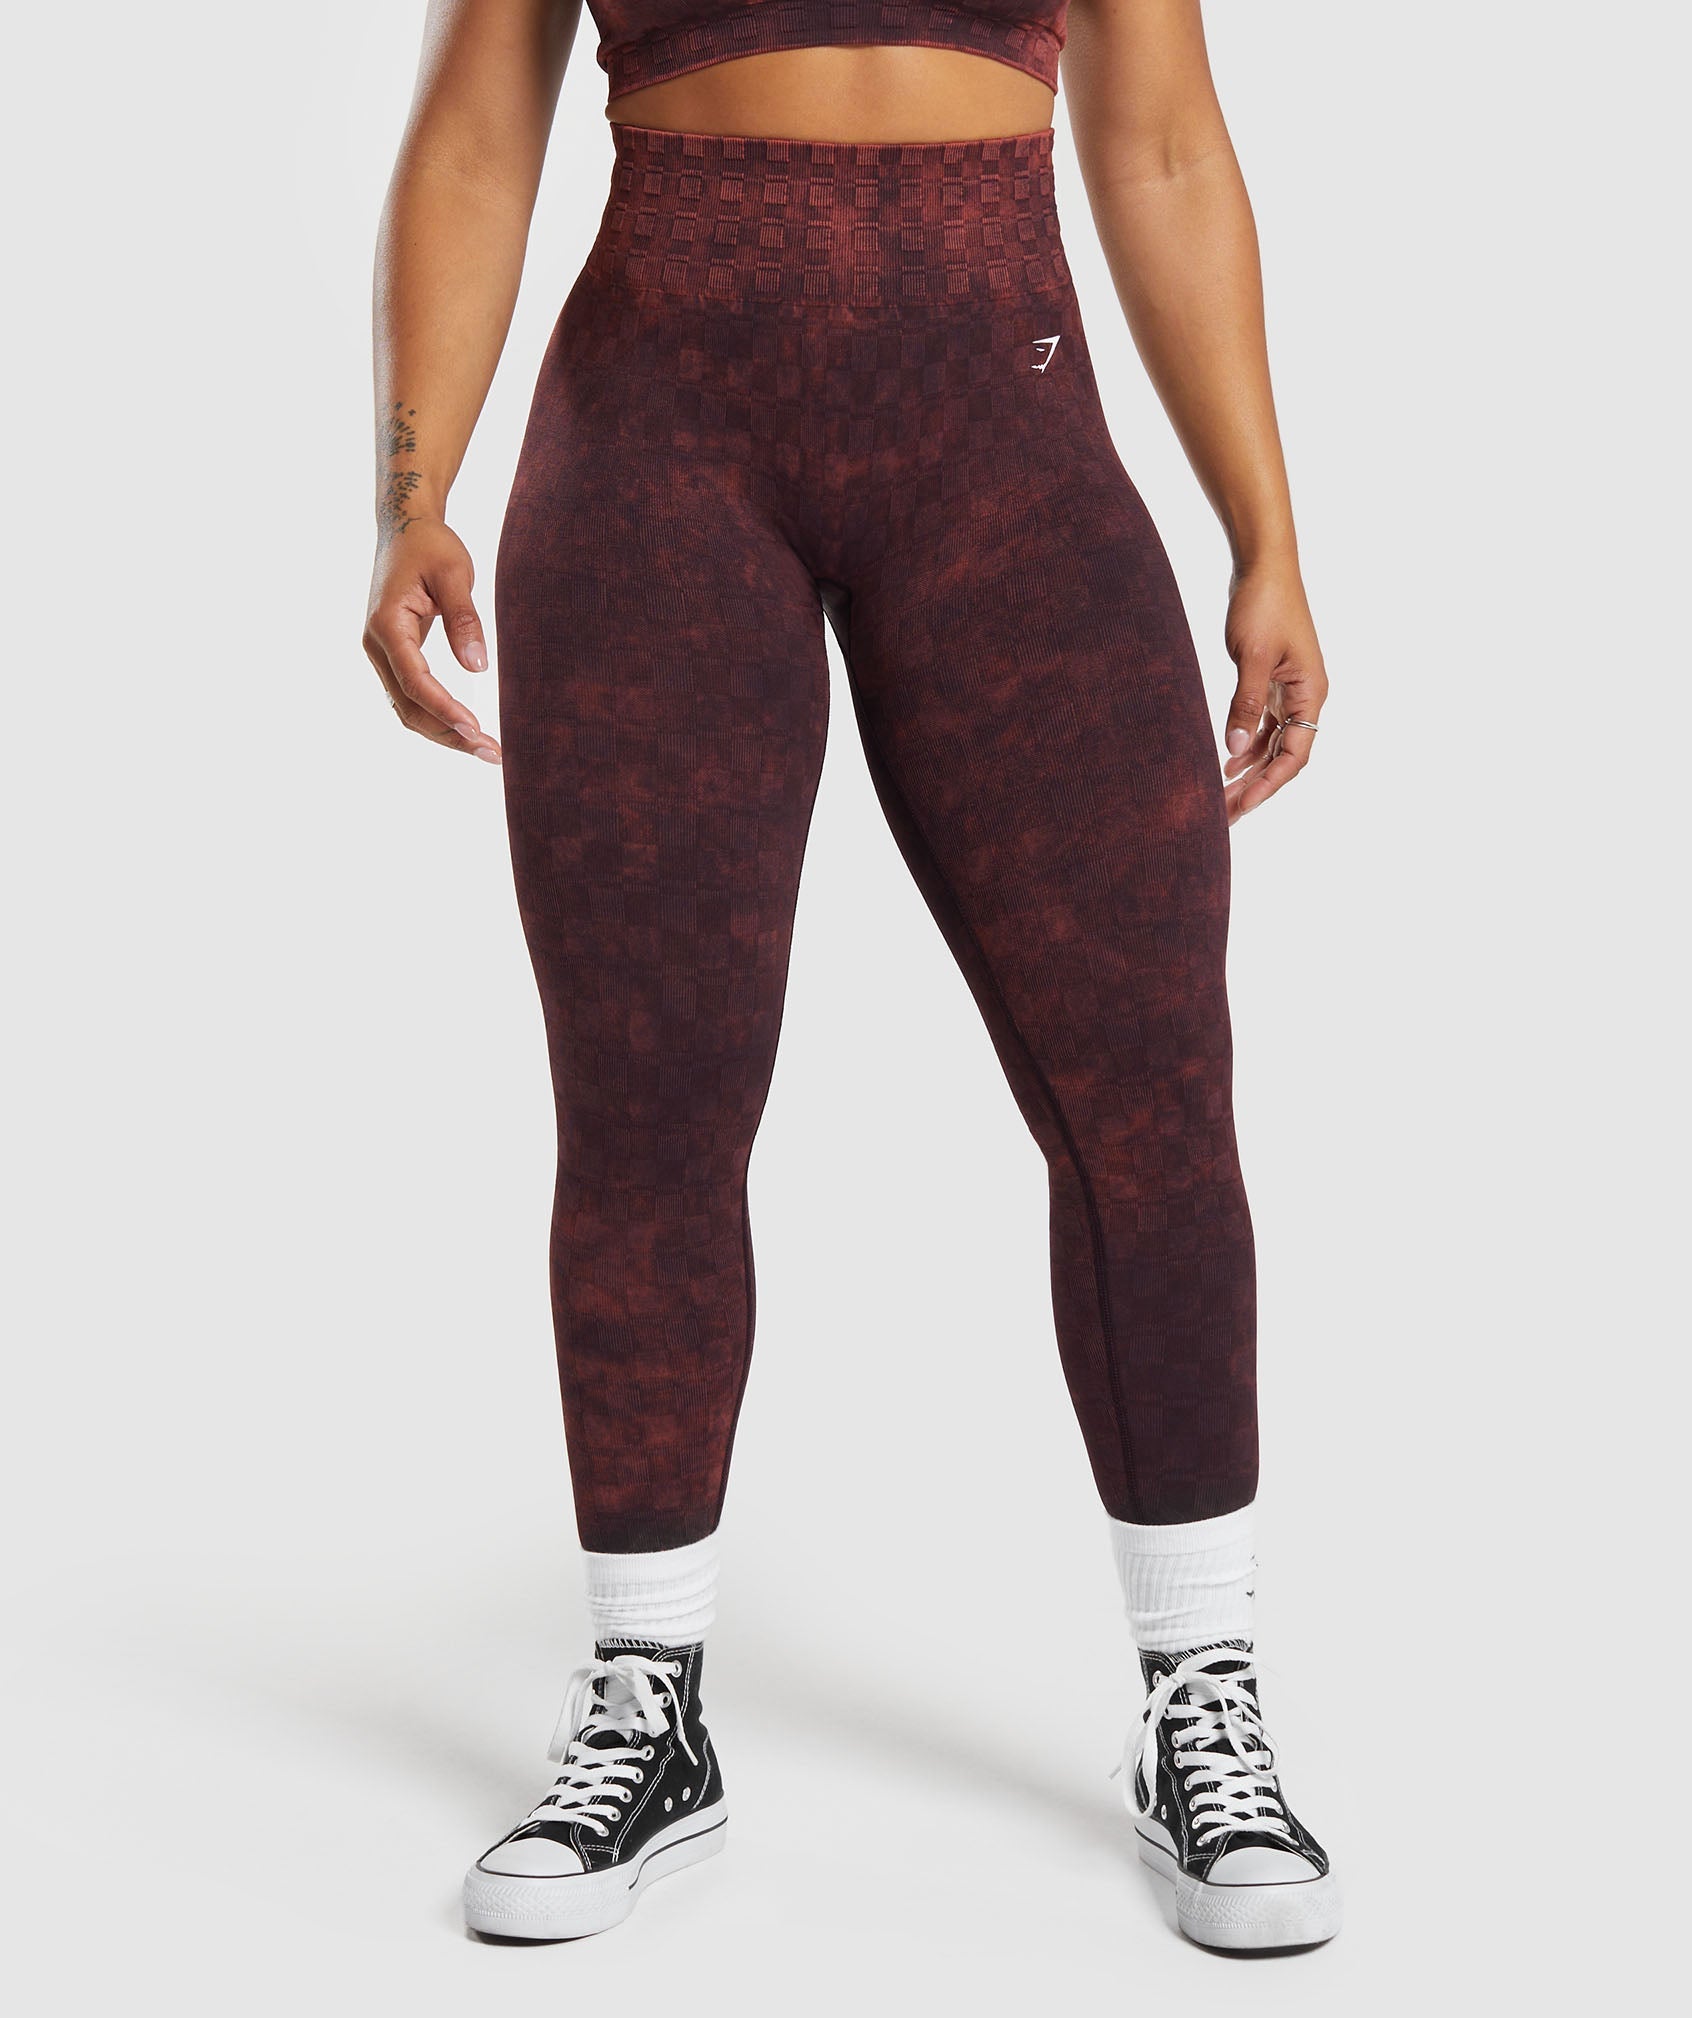 Gymshark Whitney High Rise Leggings - Palm Green – Client 446 100K products